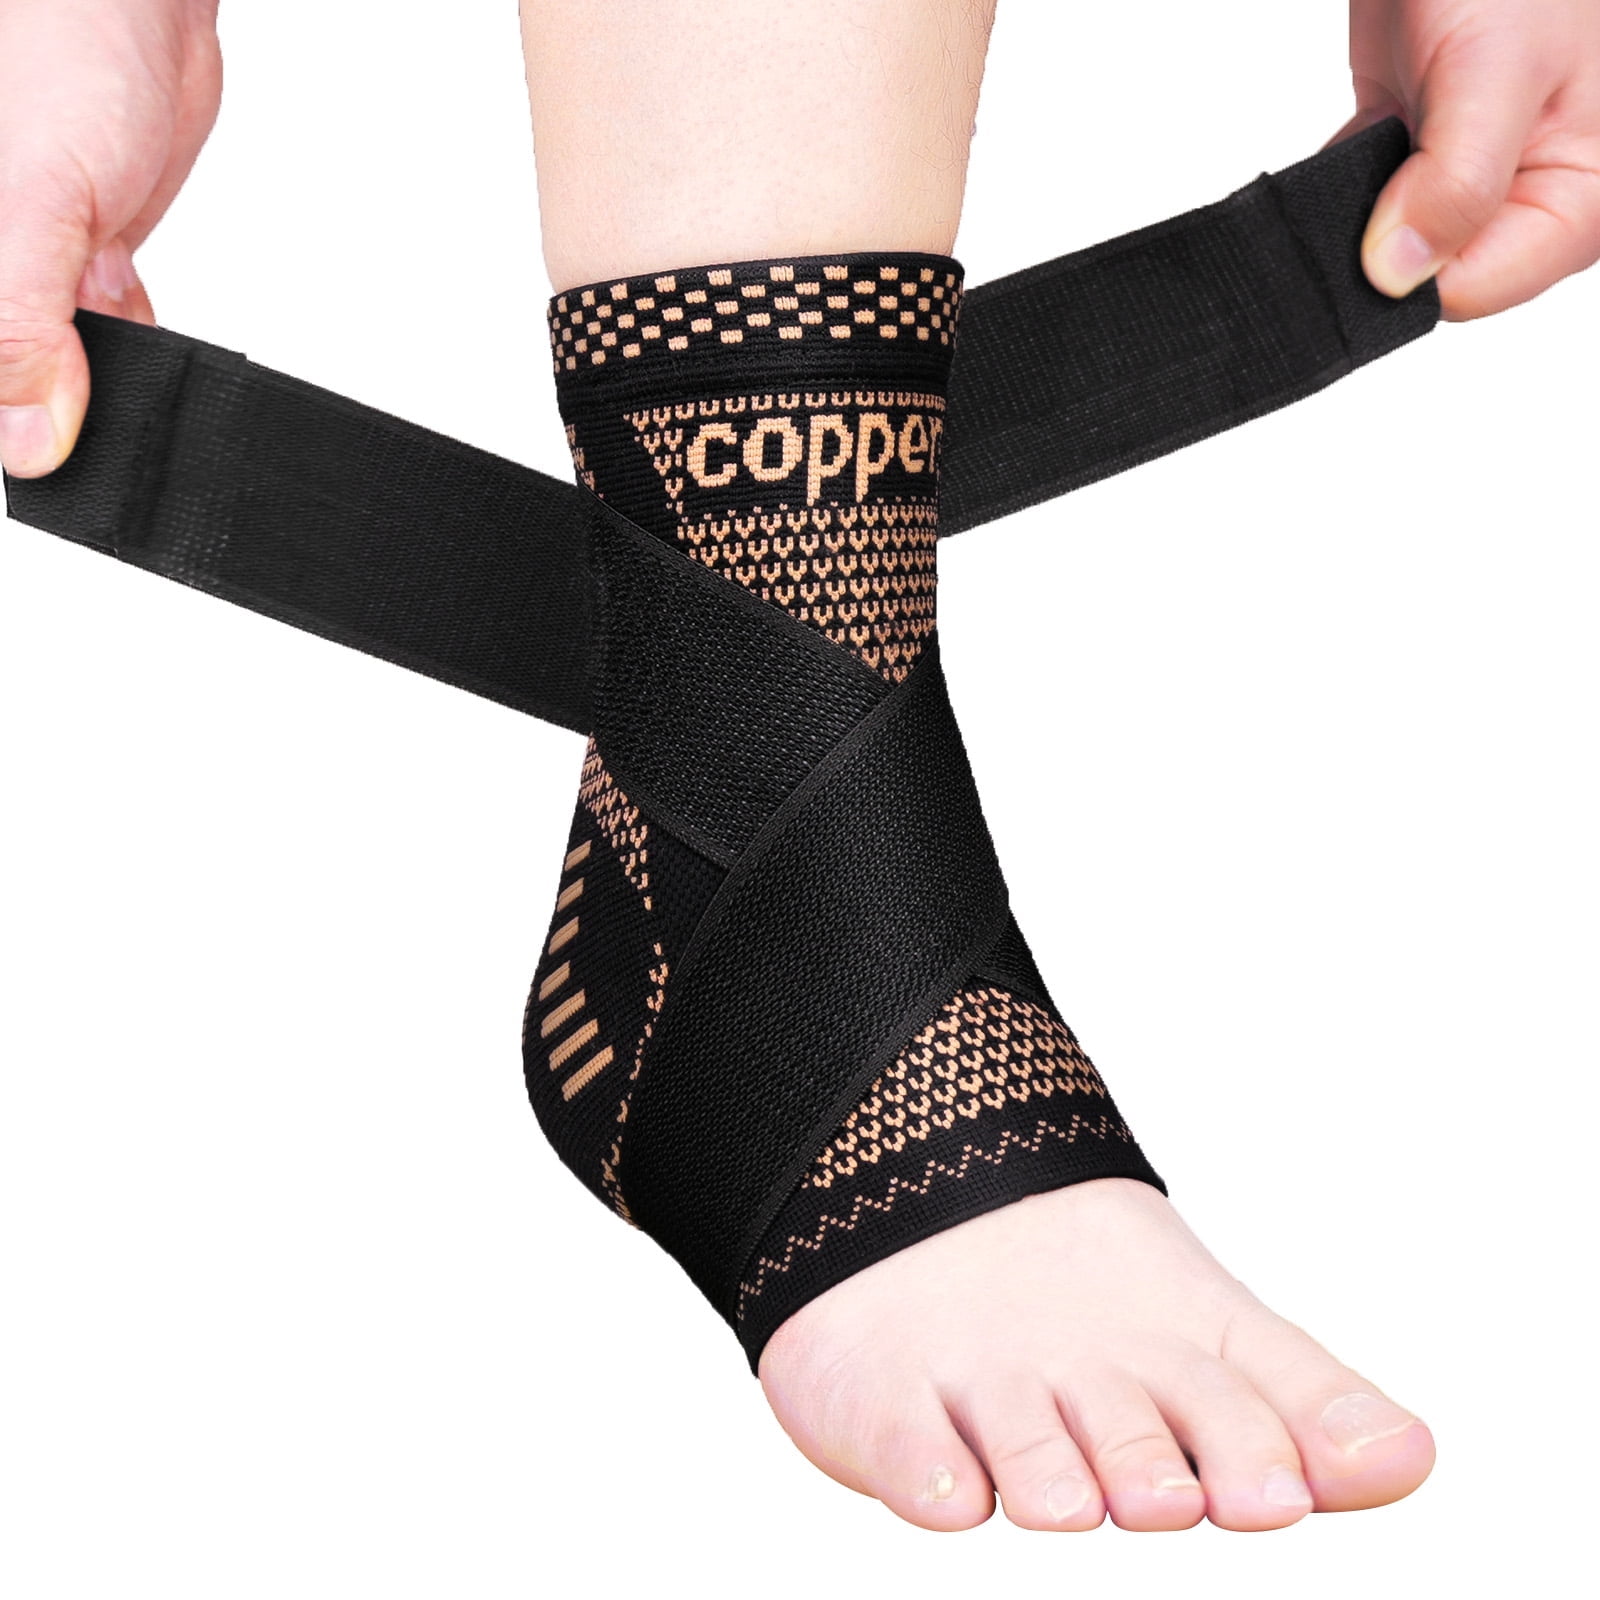 Adjustable Compression Arch Support Wrap